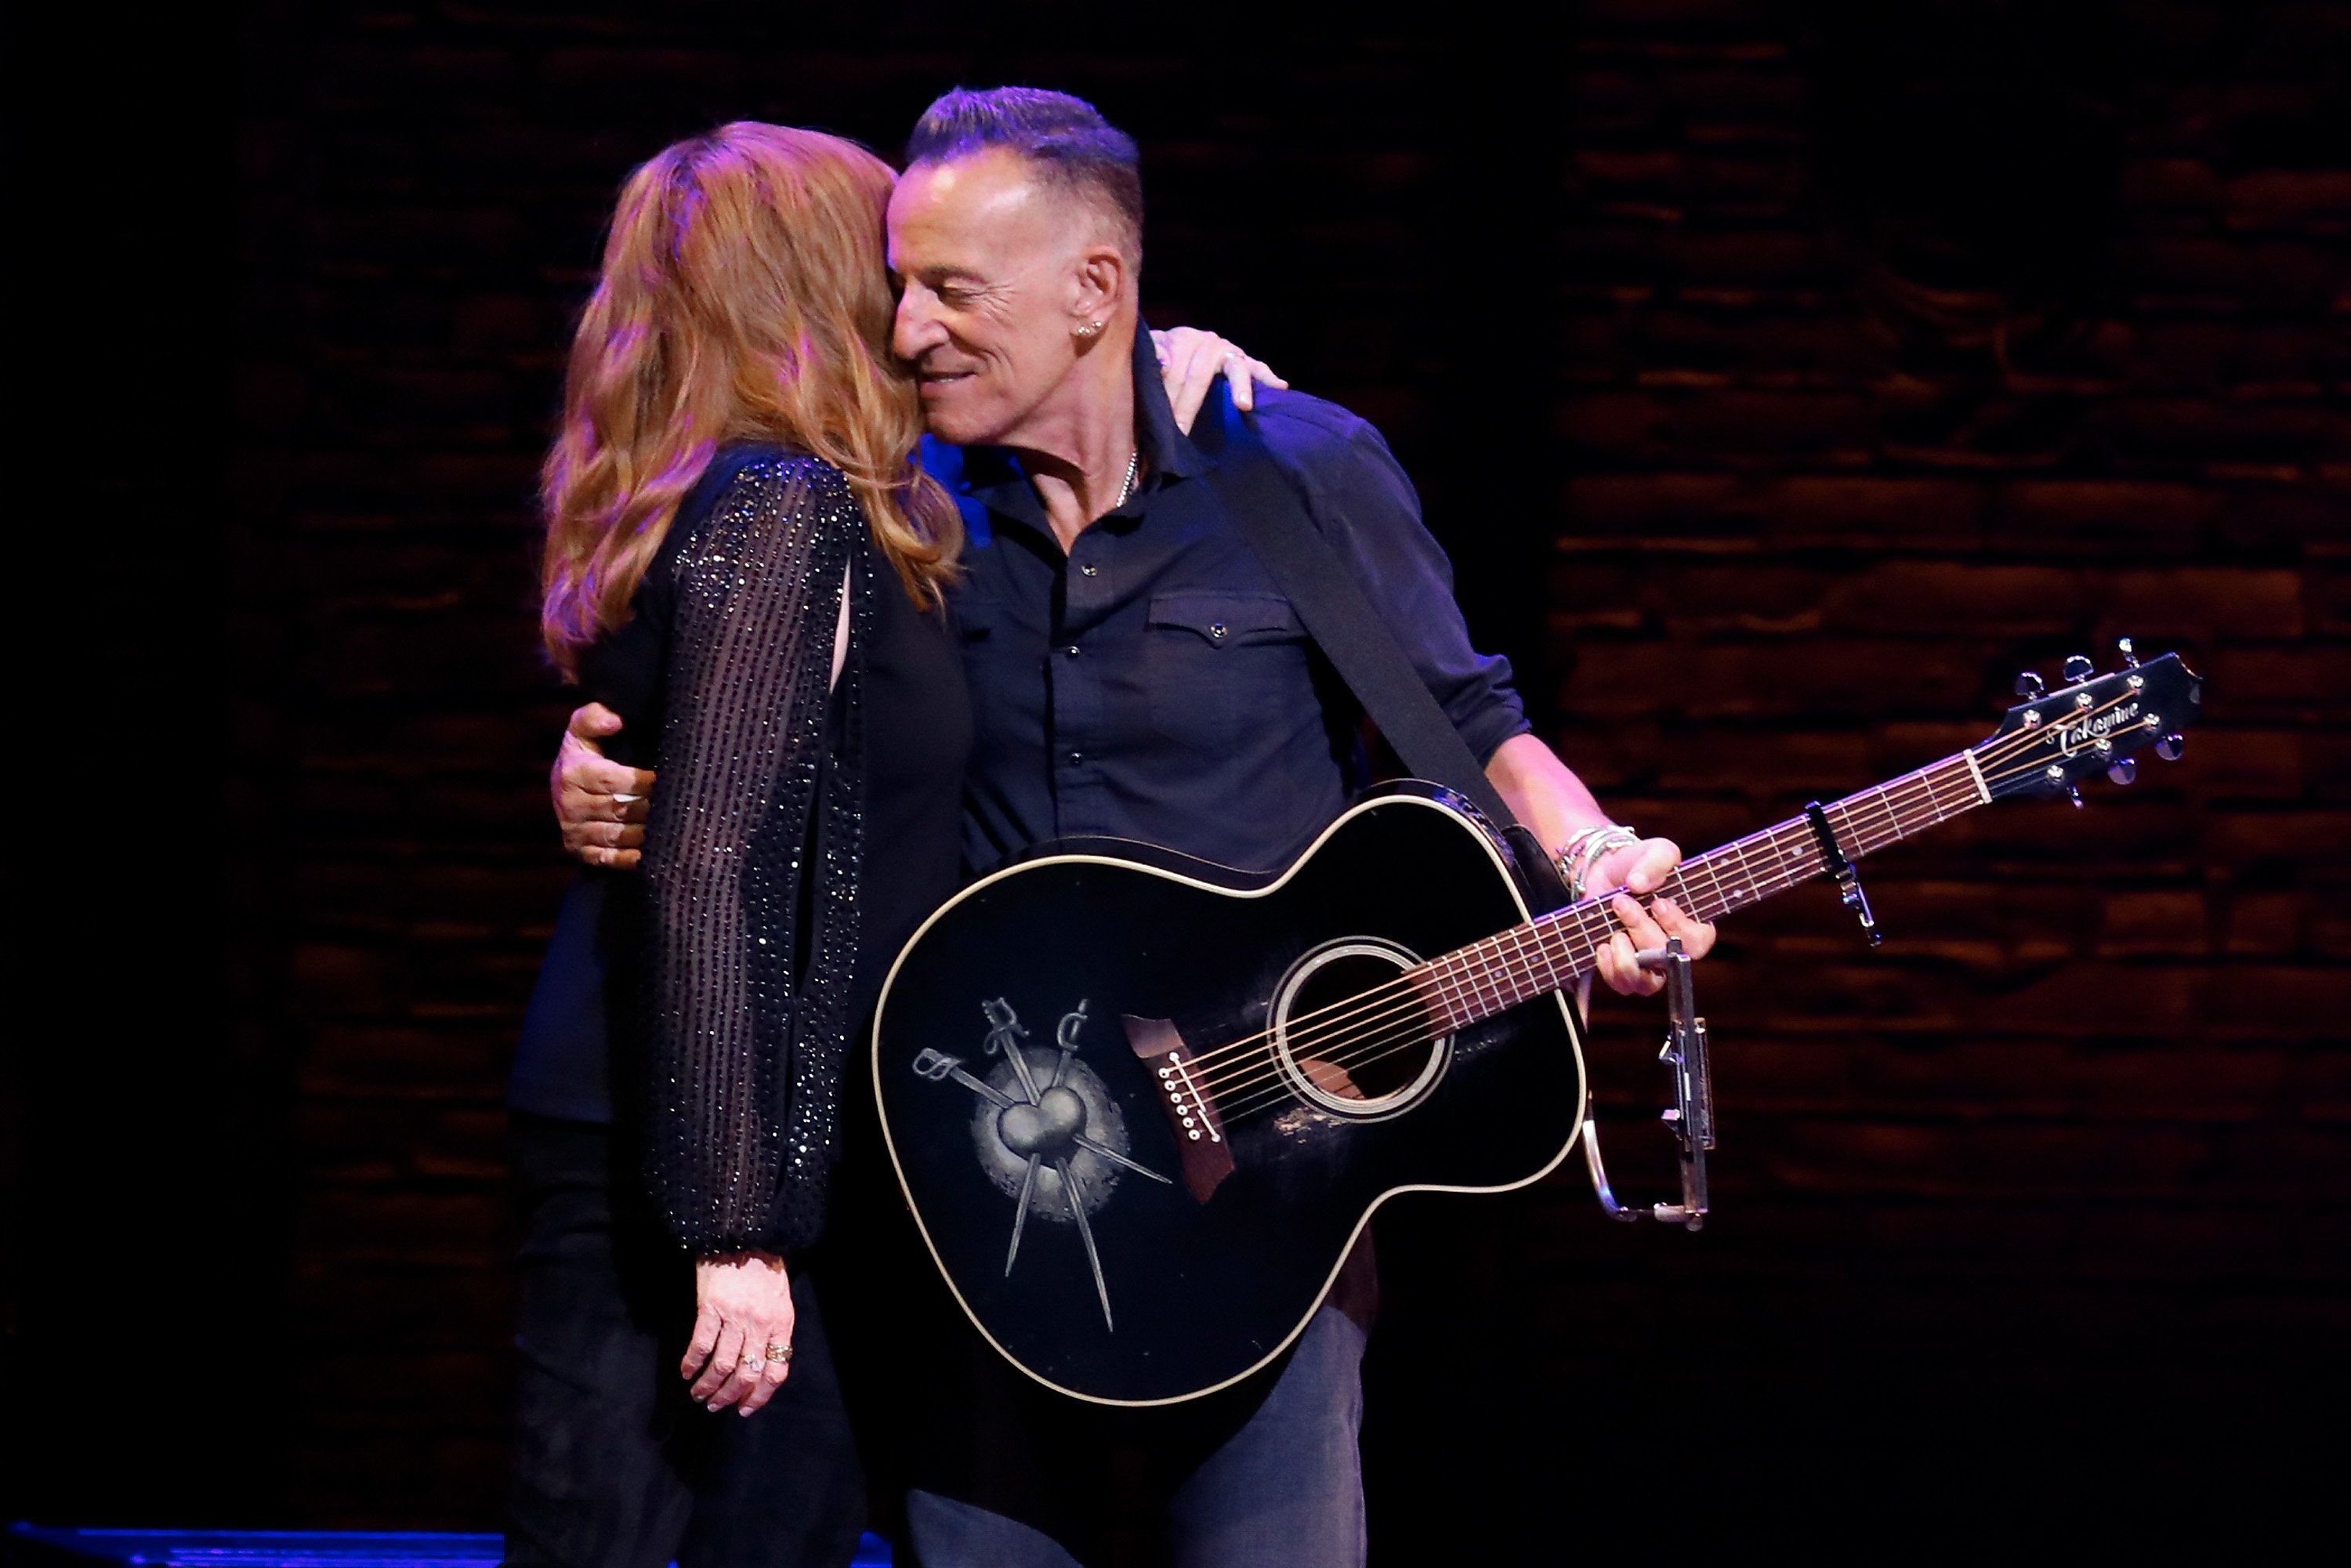 Bruce Springsteen and Patti Scialfa take a bow during the reopening night of "Springsteen on Broadway" for a full capacity vaccinated audience at the St. James Theater on June 26, 2021 in New York City.  |  Source: Getty Images